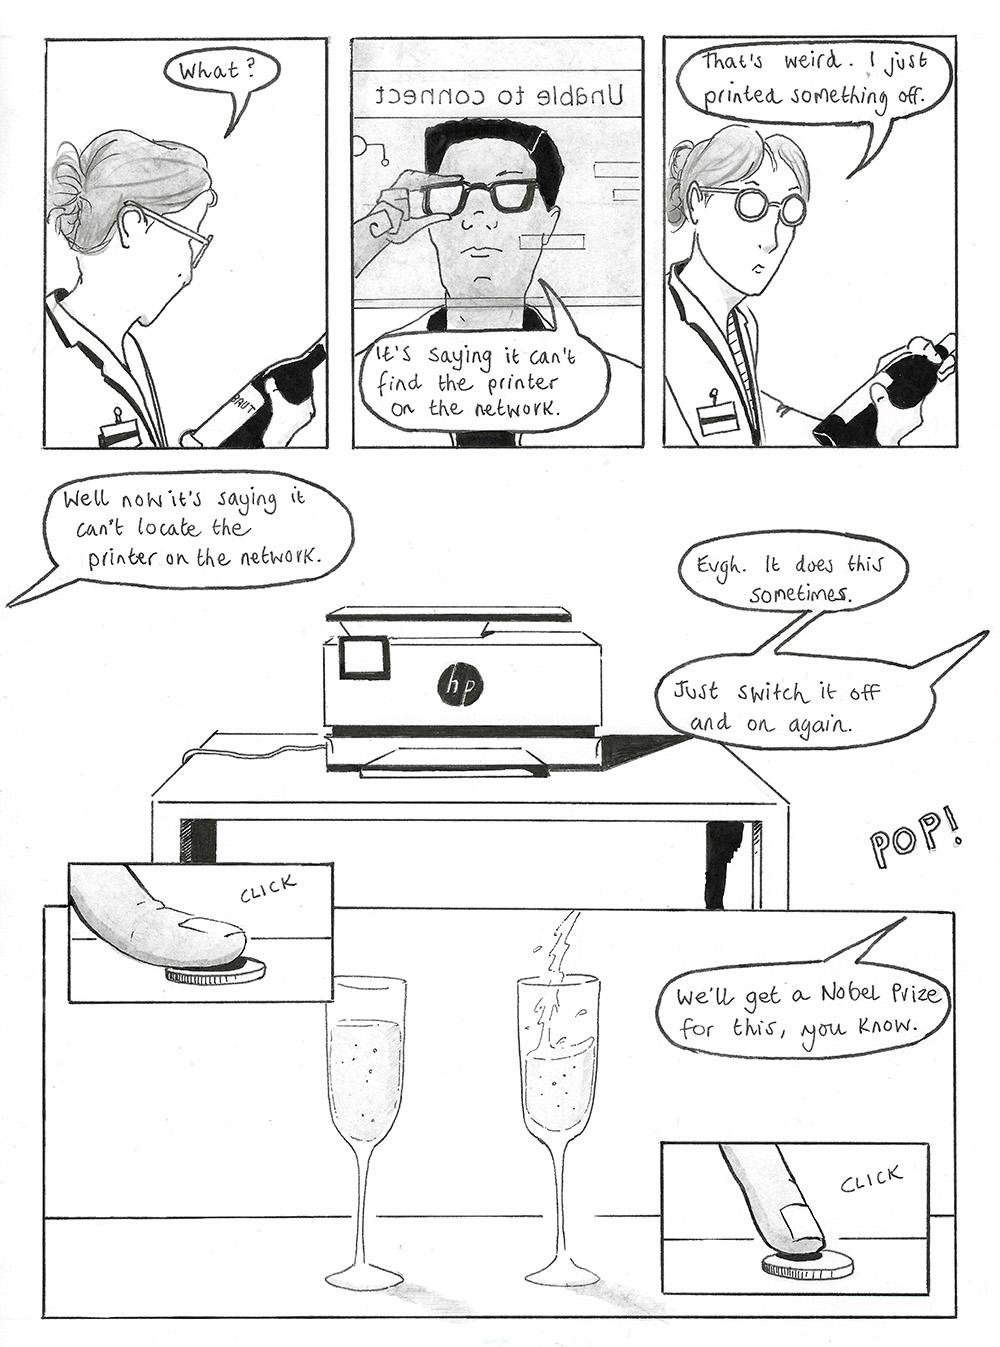 Page 3 of Connection Error, a black and white comic by Adam Westbrook